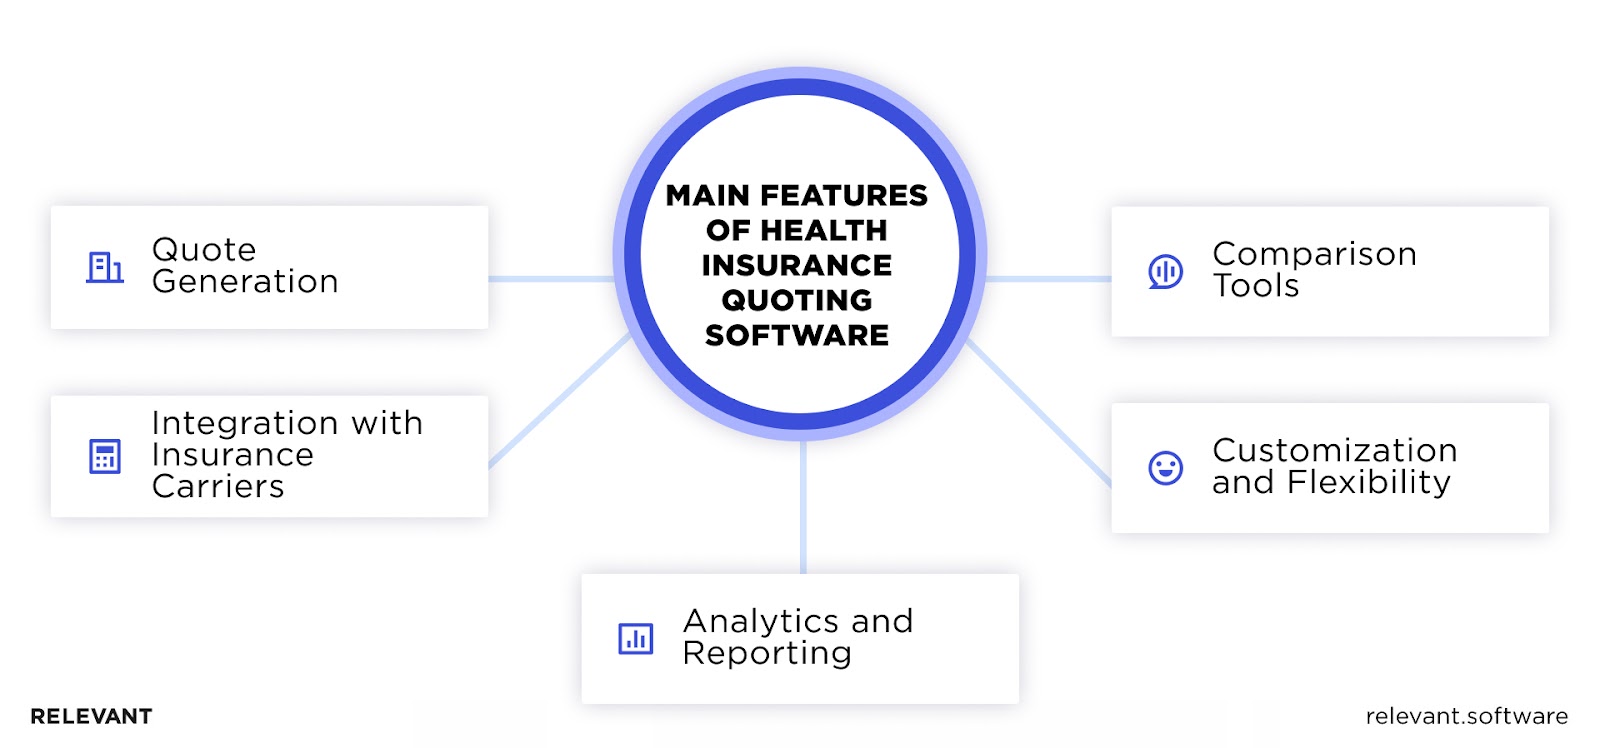 Features of Health Insurance Quoting Software